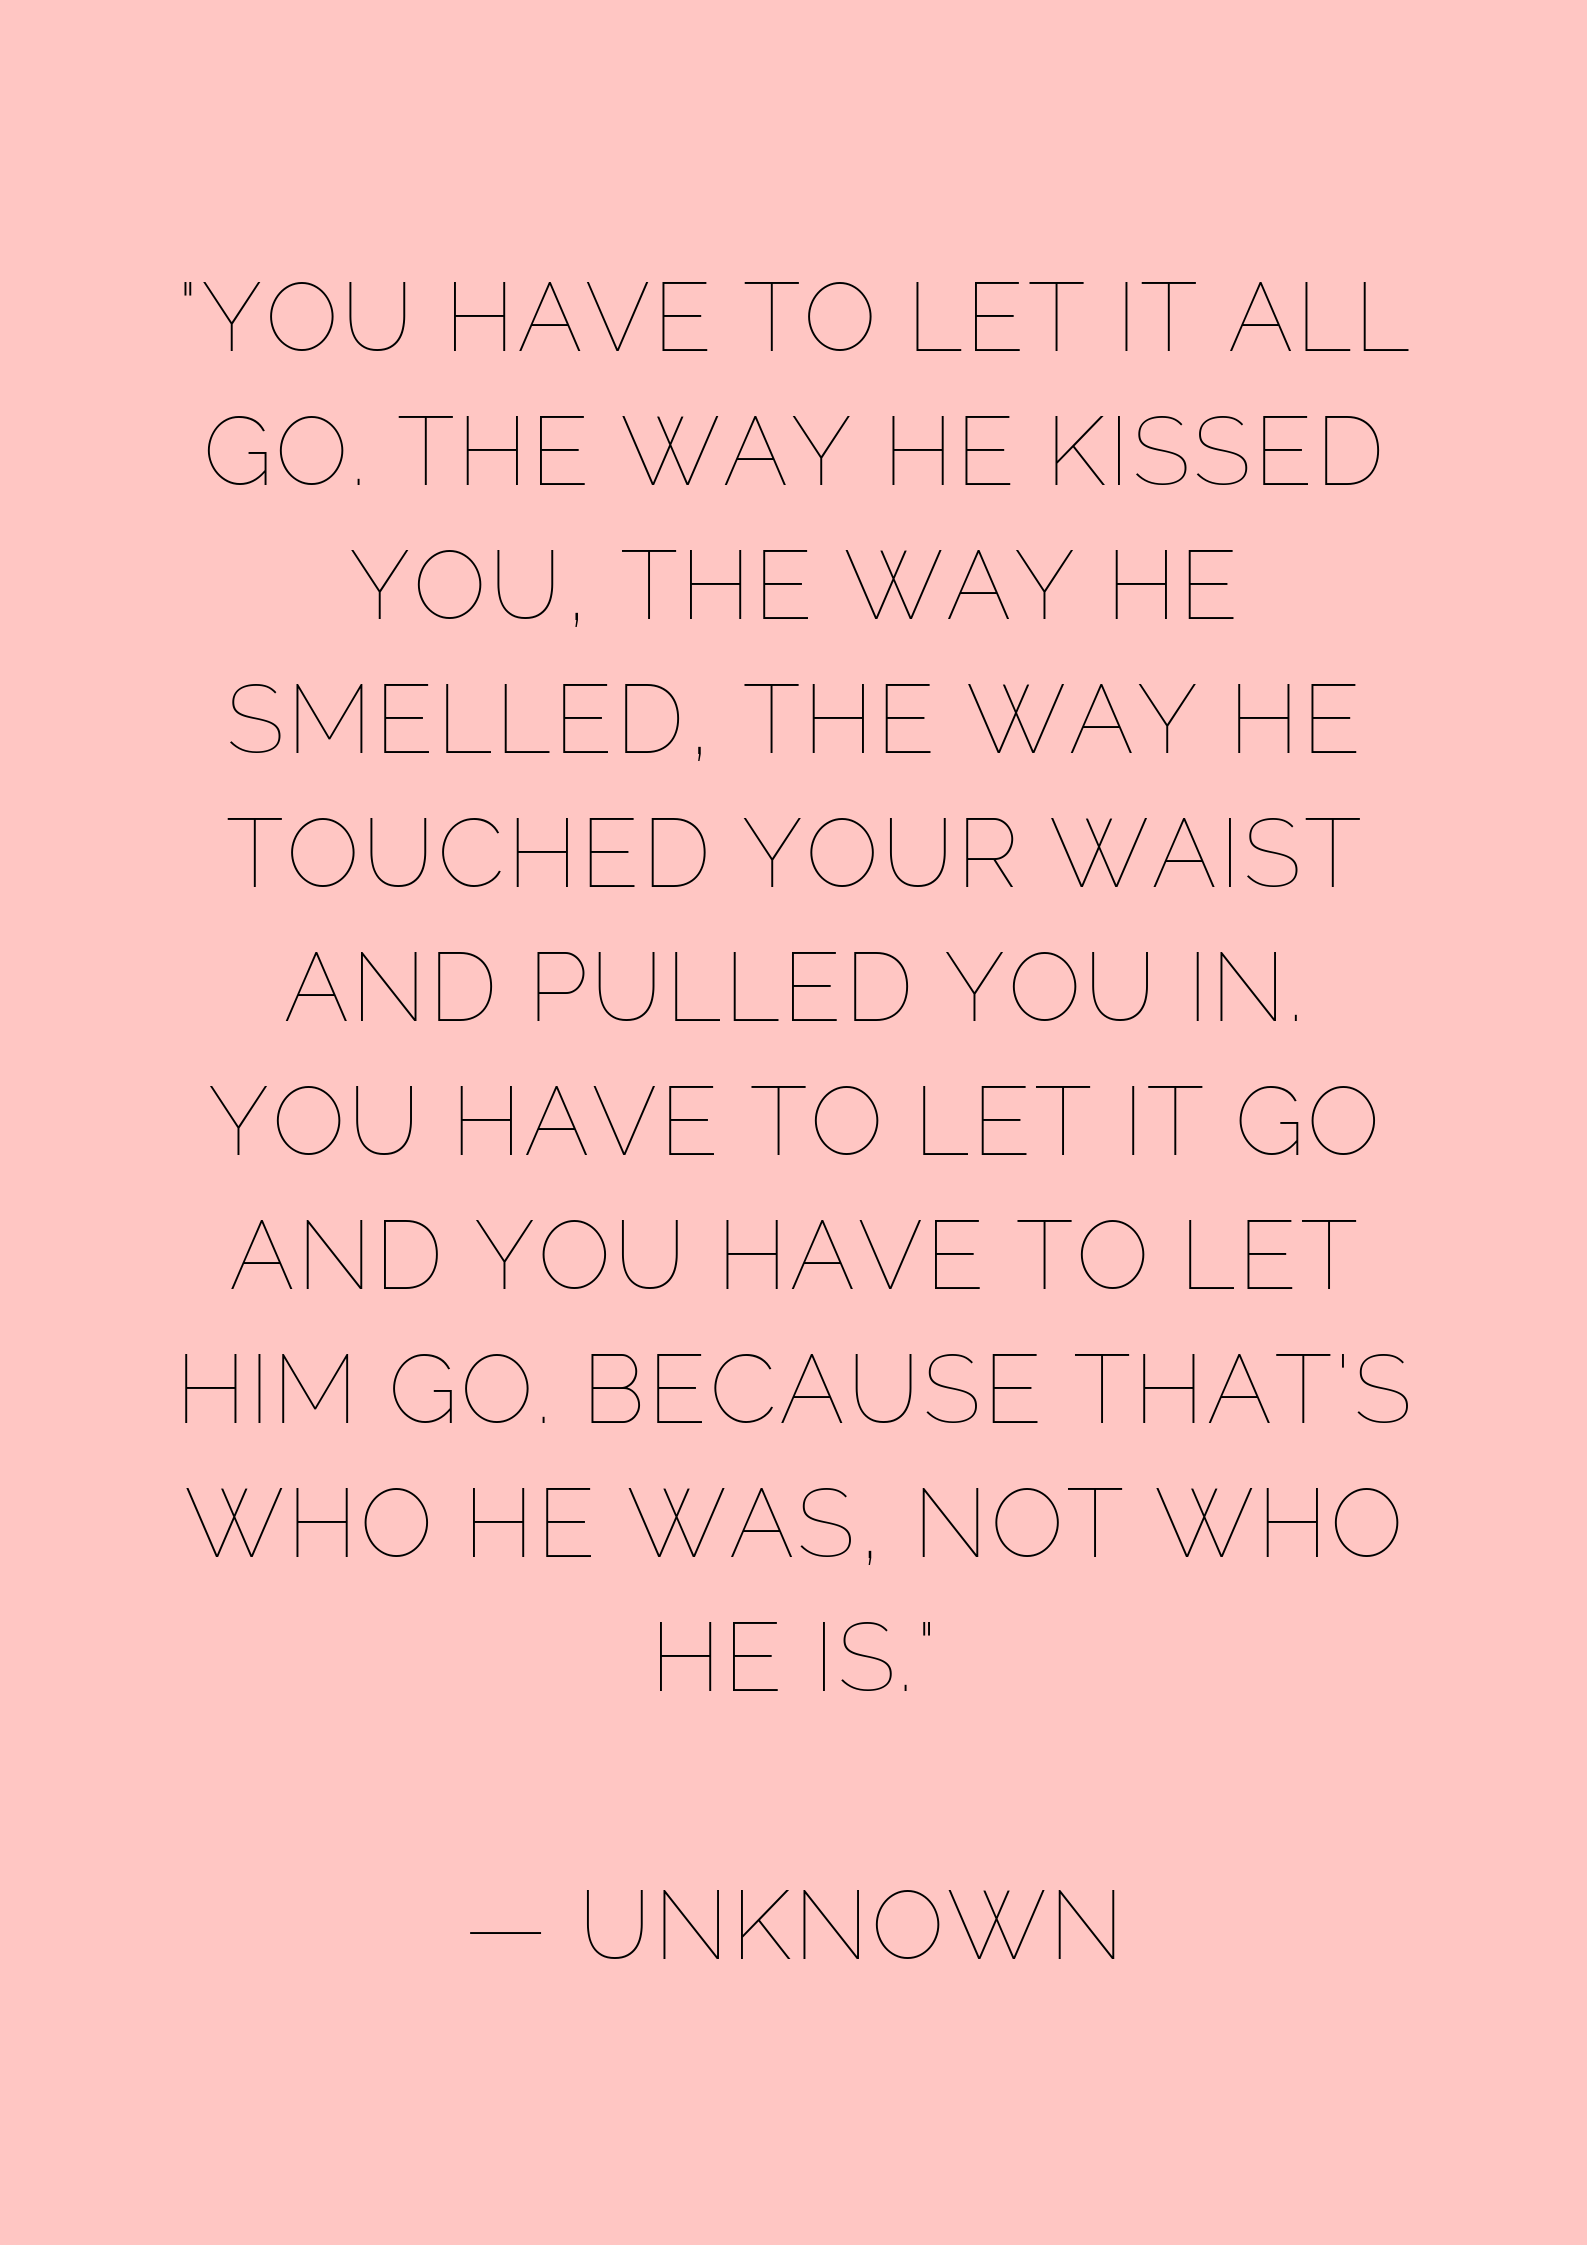 125 Love & Break Up Quotes for Her To Get Over Him - For Good - museuly